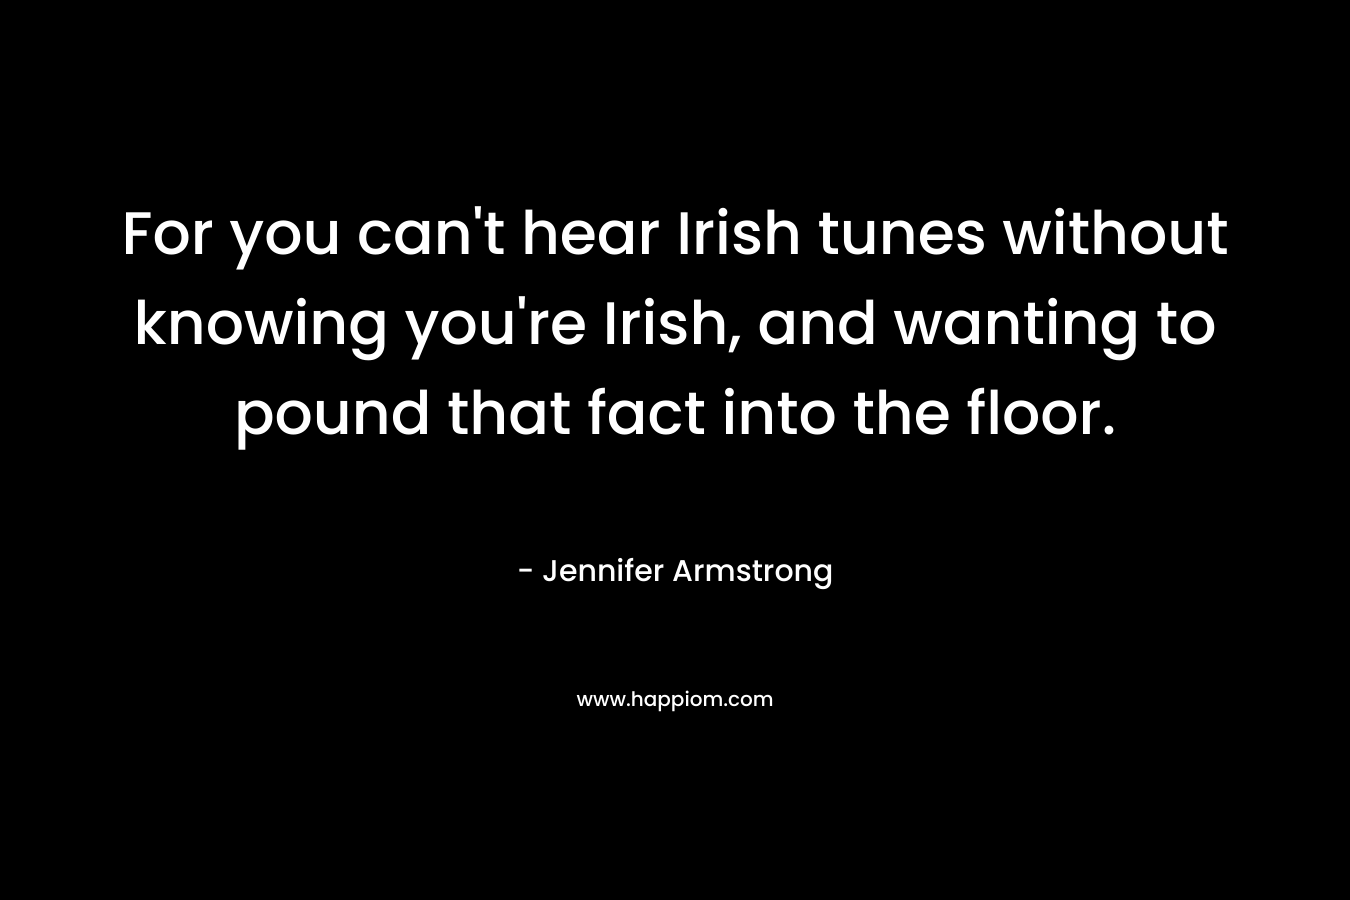 For you can’t hear Irish tunes without knowing you’re Irish, and wanting to pound that fact into the floor. – Jennifer Armstrong